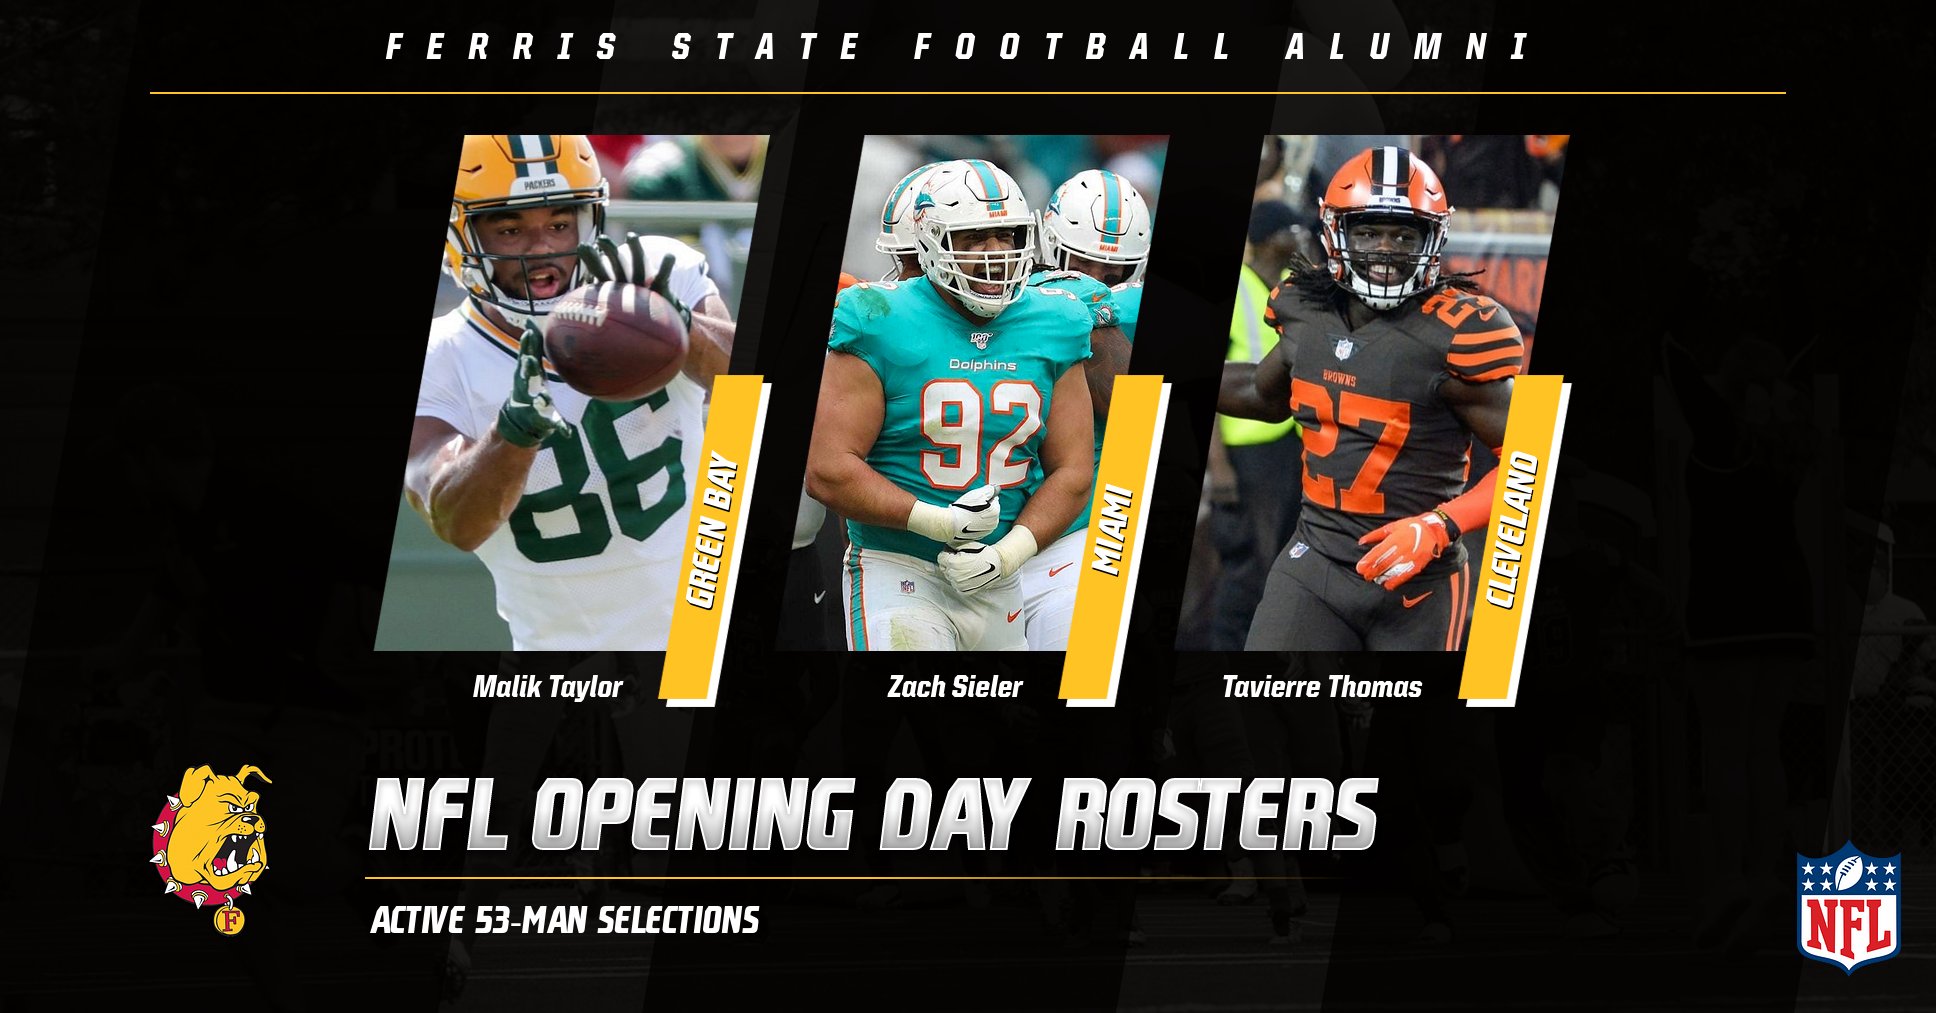 School-Best Three Ferris State Football Alums Named To NFL Opening Day Rosters